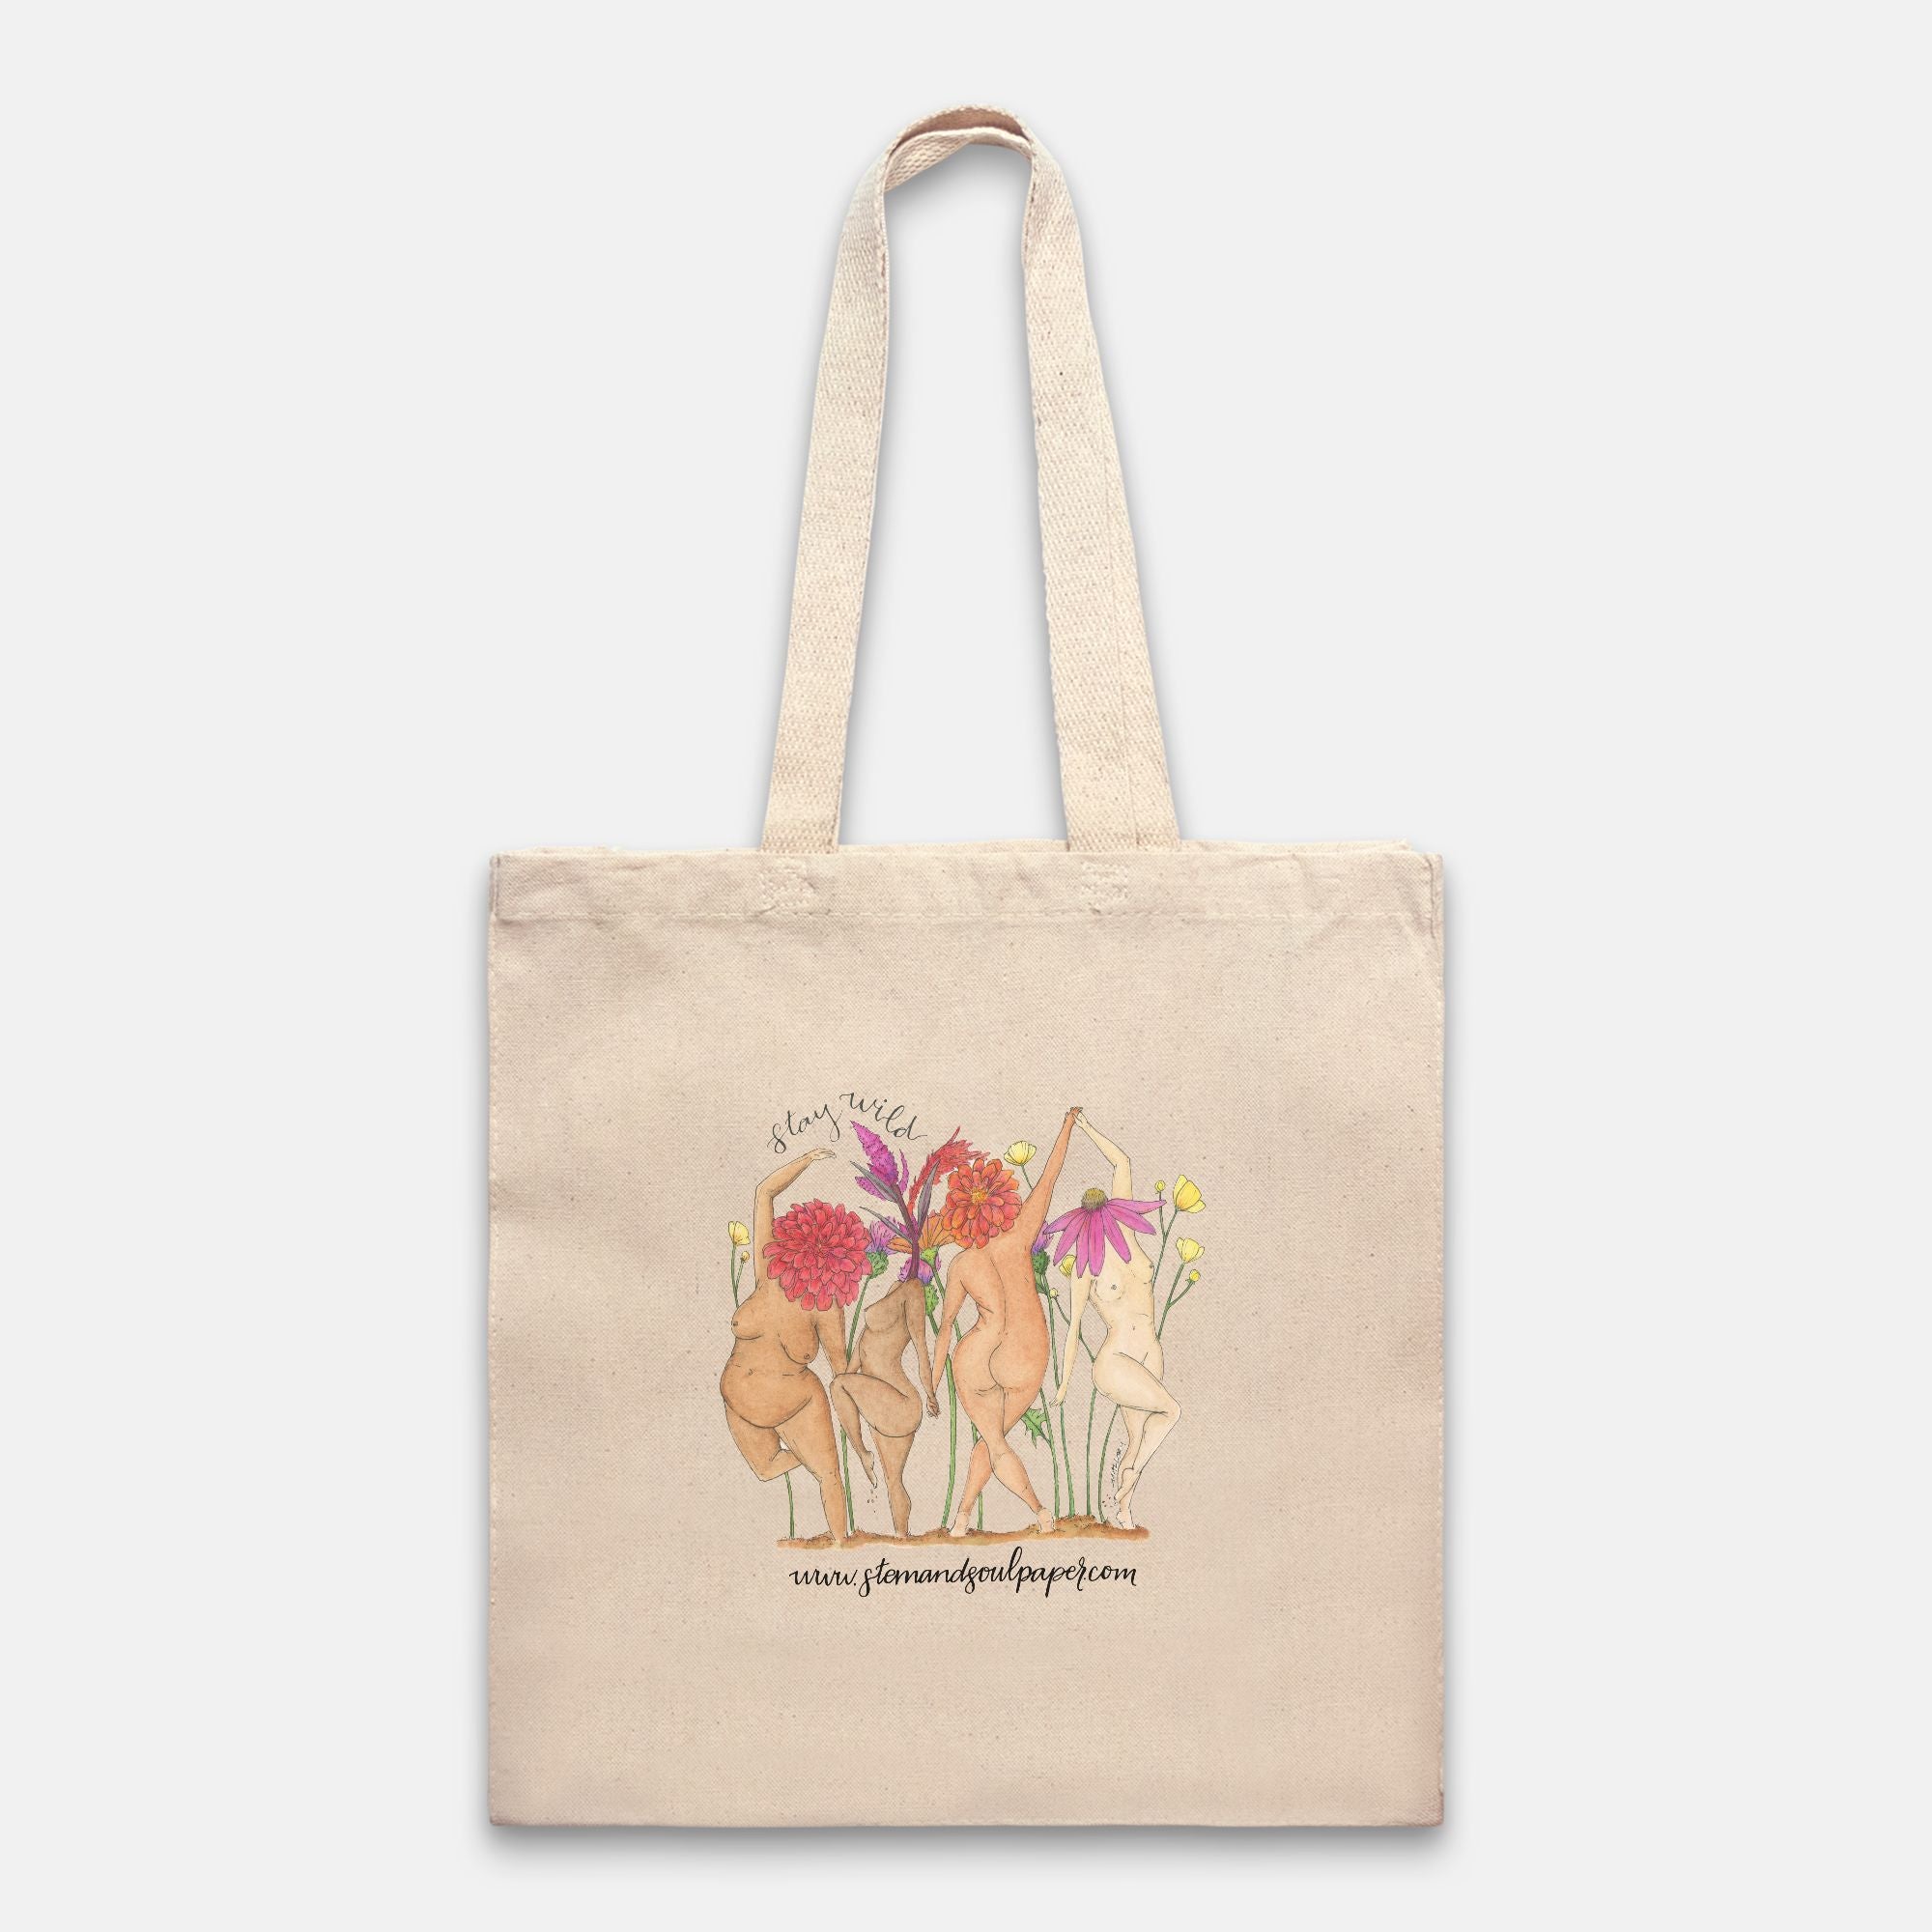 Stay Wild Canvas Tote Bag